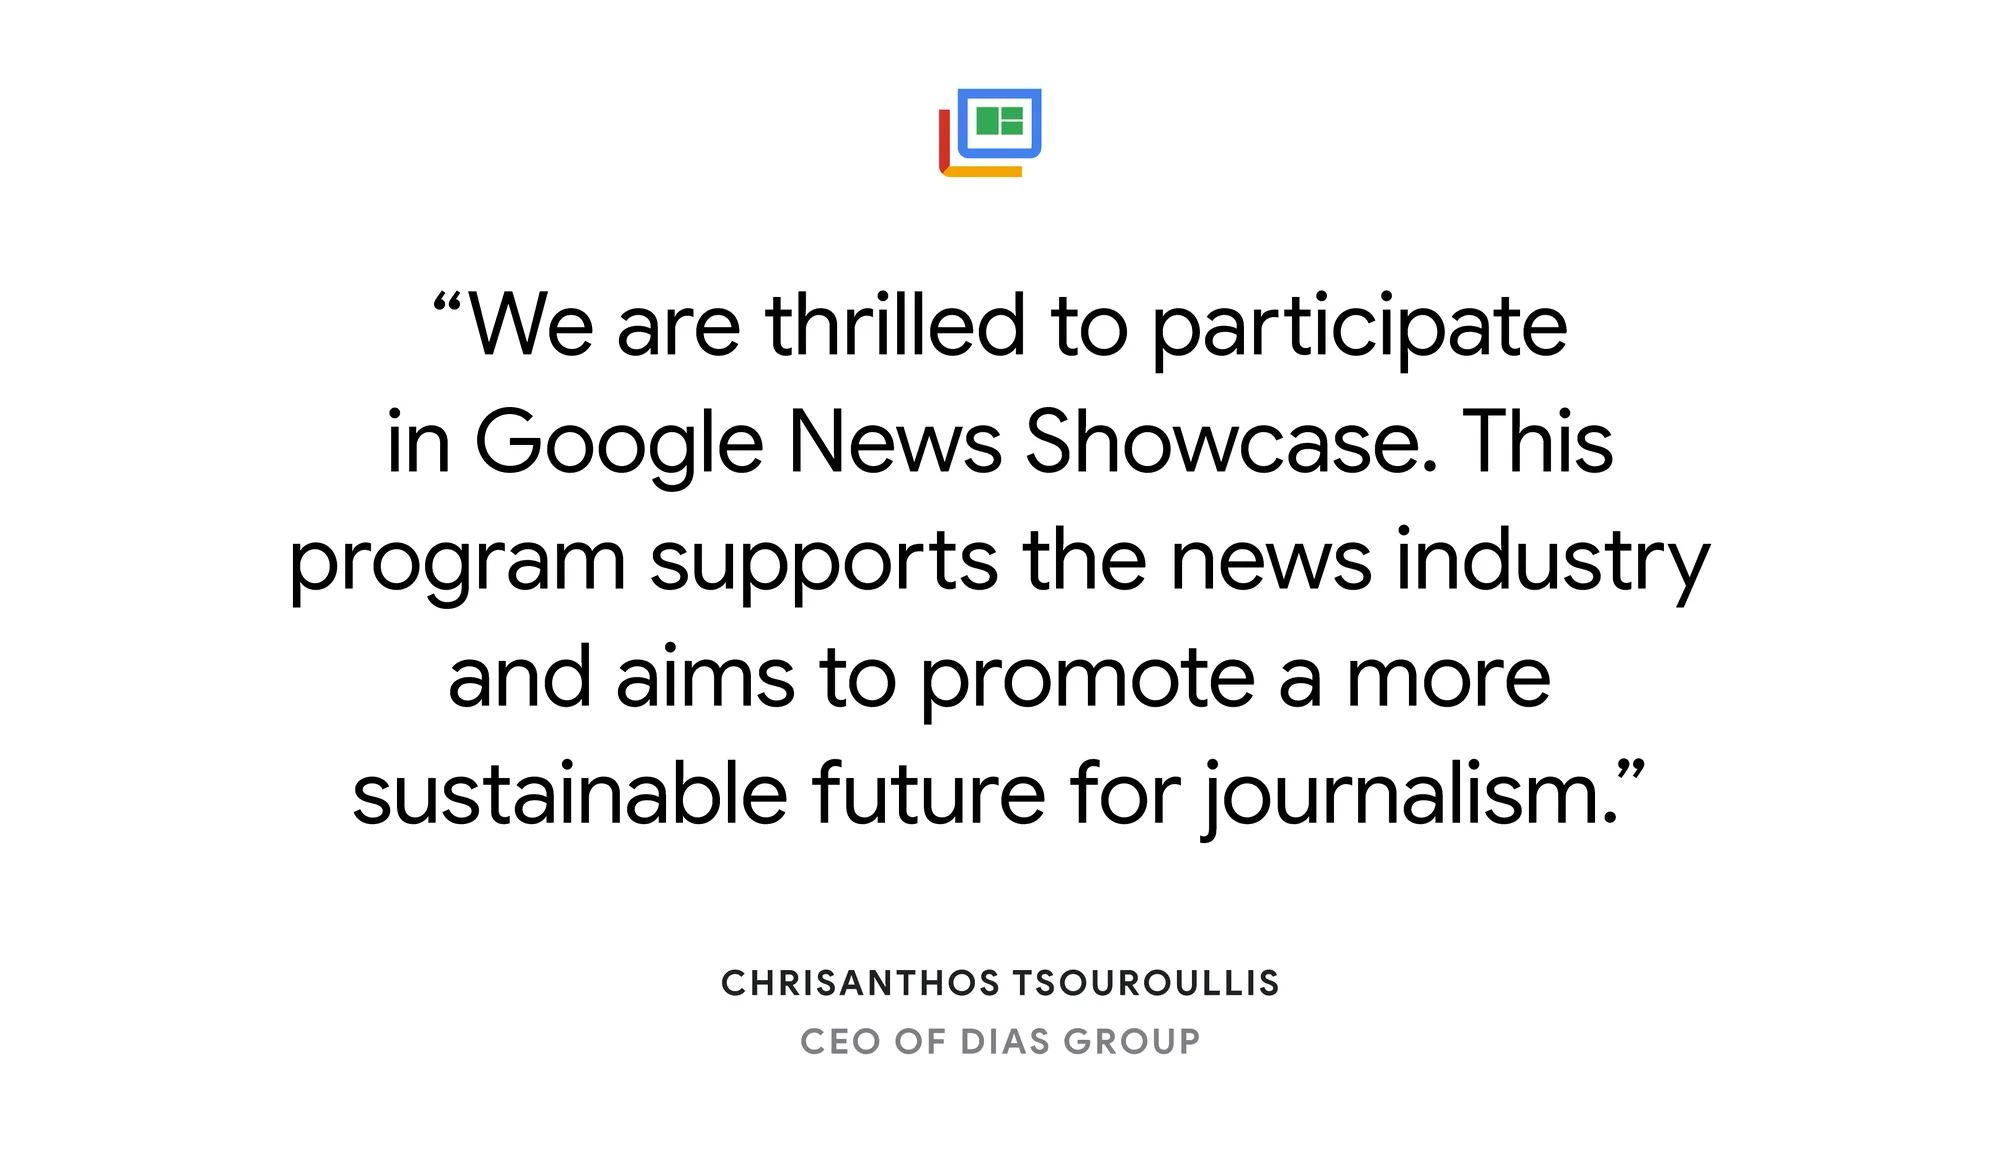 Illustrated card reading “We are thrilled to participate in Google News Showcase. This program supports the news industry and aims to promote a more sustainable future for journalism.” - Chrisanthos Tsouroullis, CEO of Dias Group.